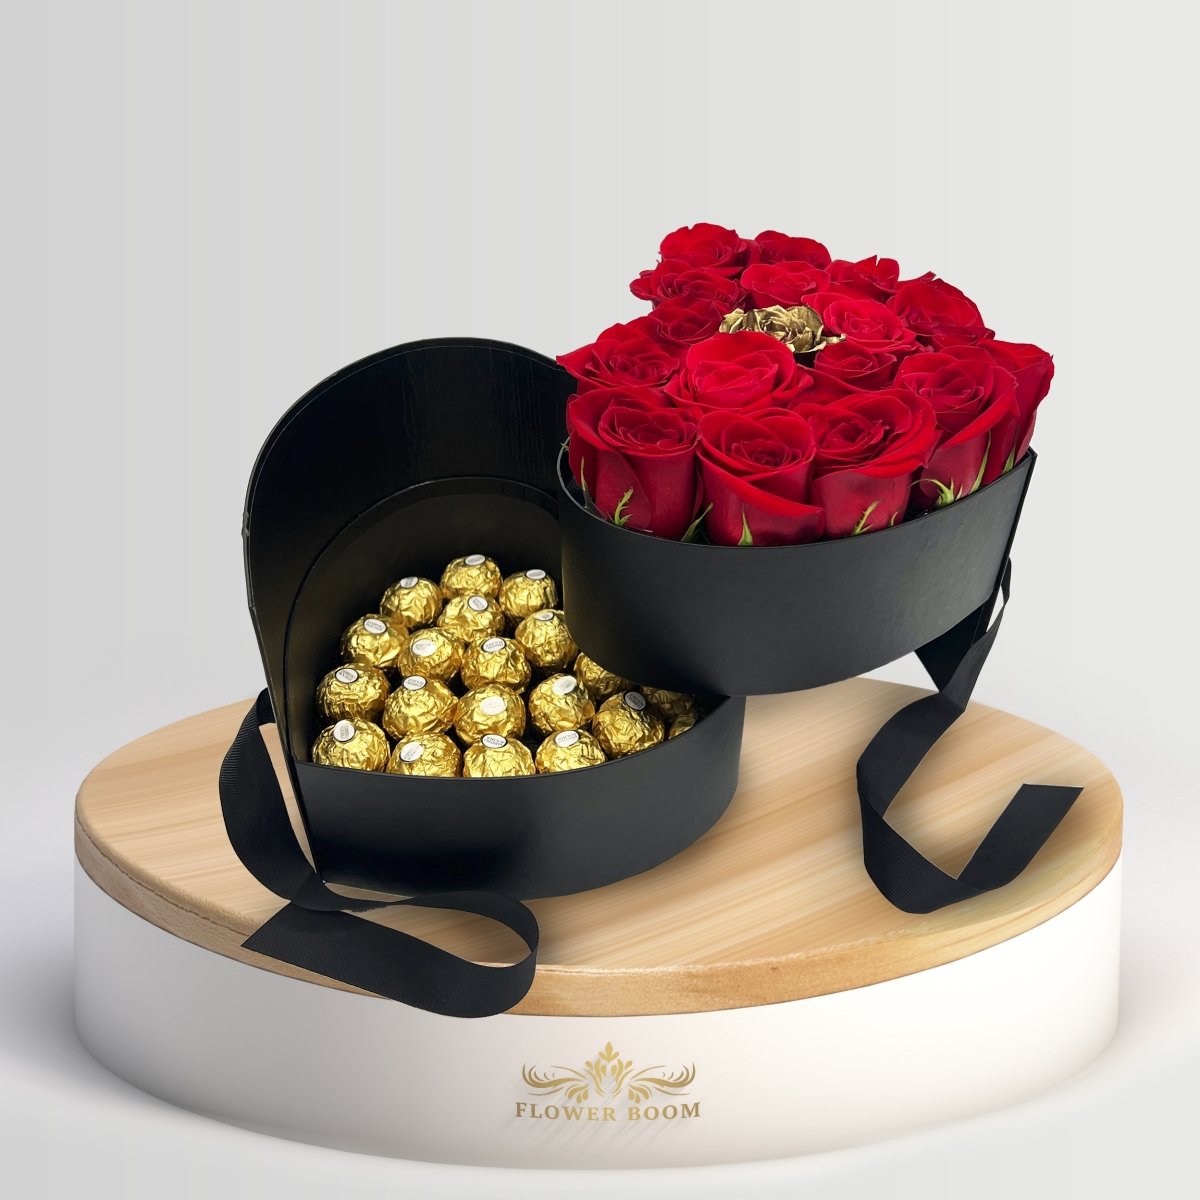 Red Roses & Chocolates In A Two Tier Heart Shaped Box - Flower Boom Dallas